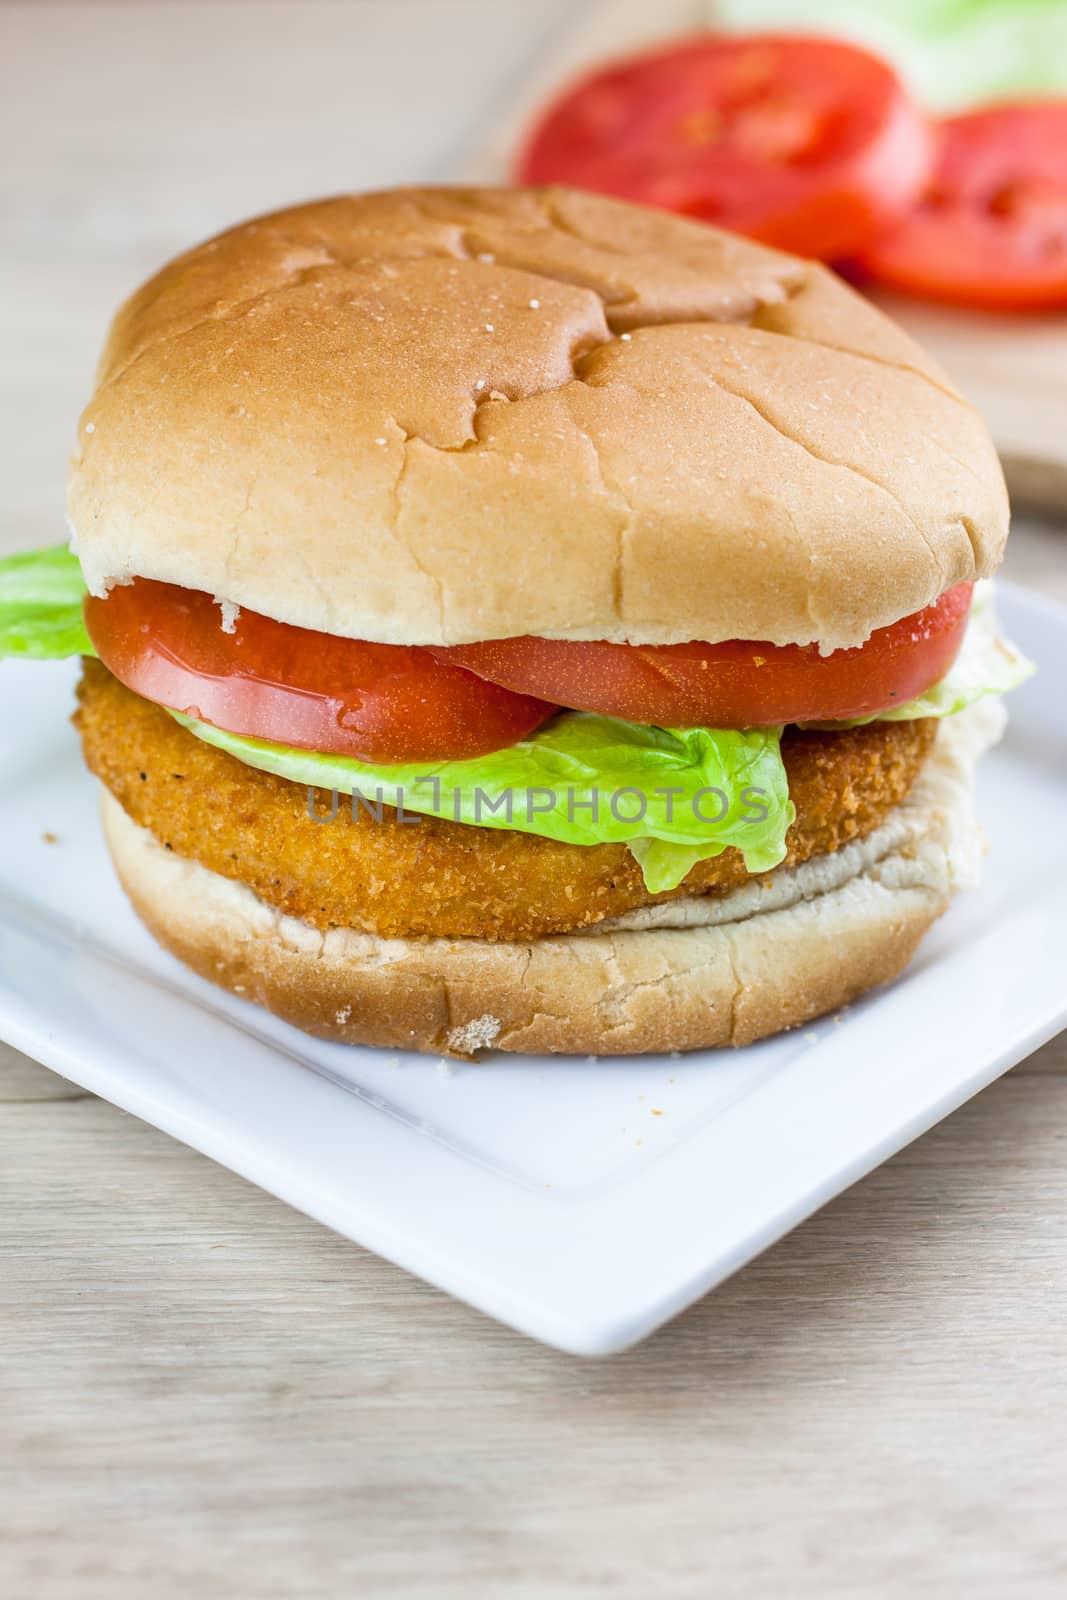 A chicken sandwich with fresh tomato and lettuce on a white plate.